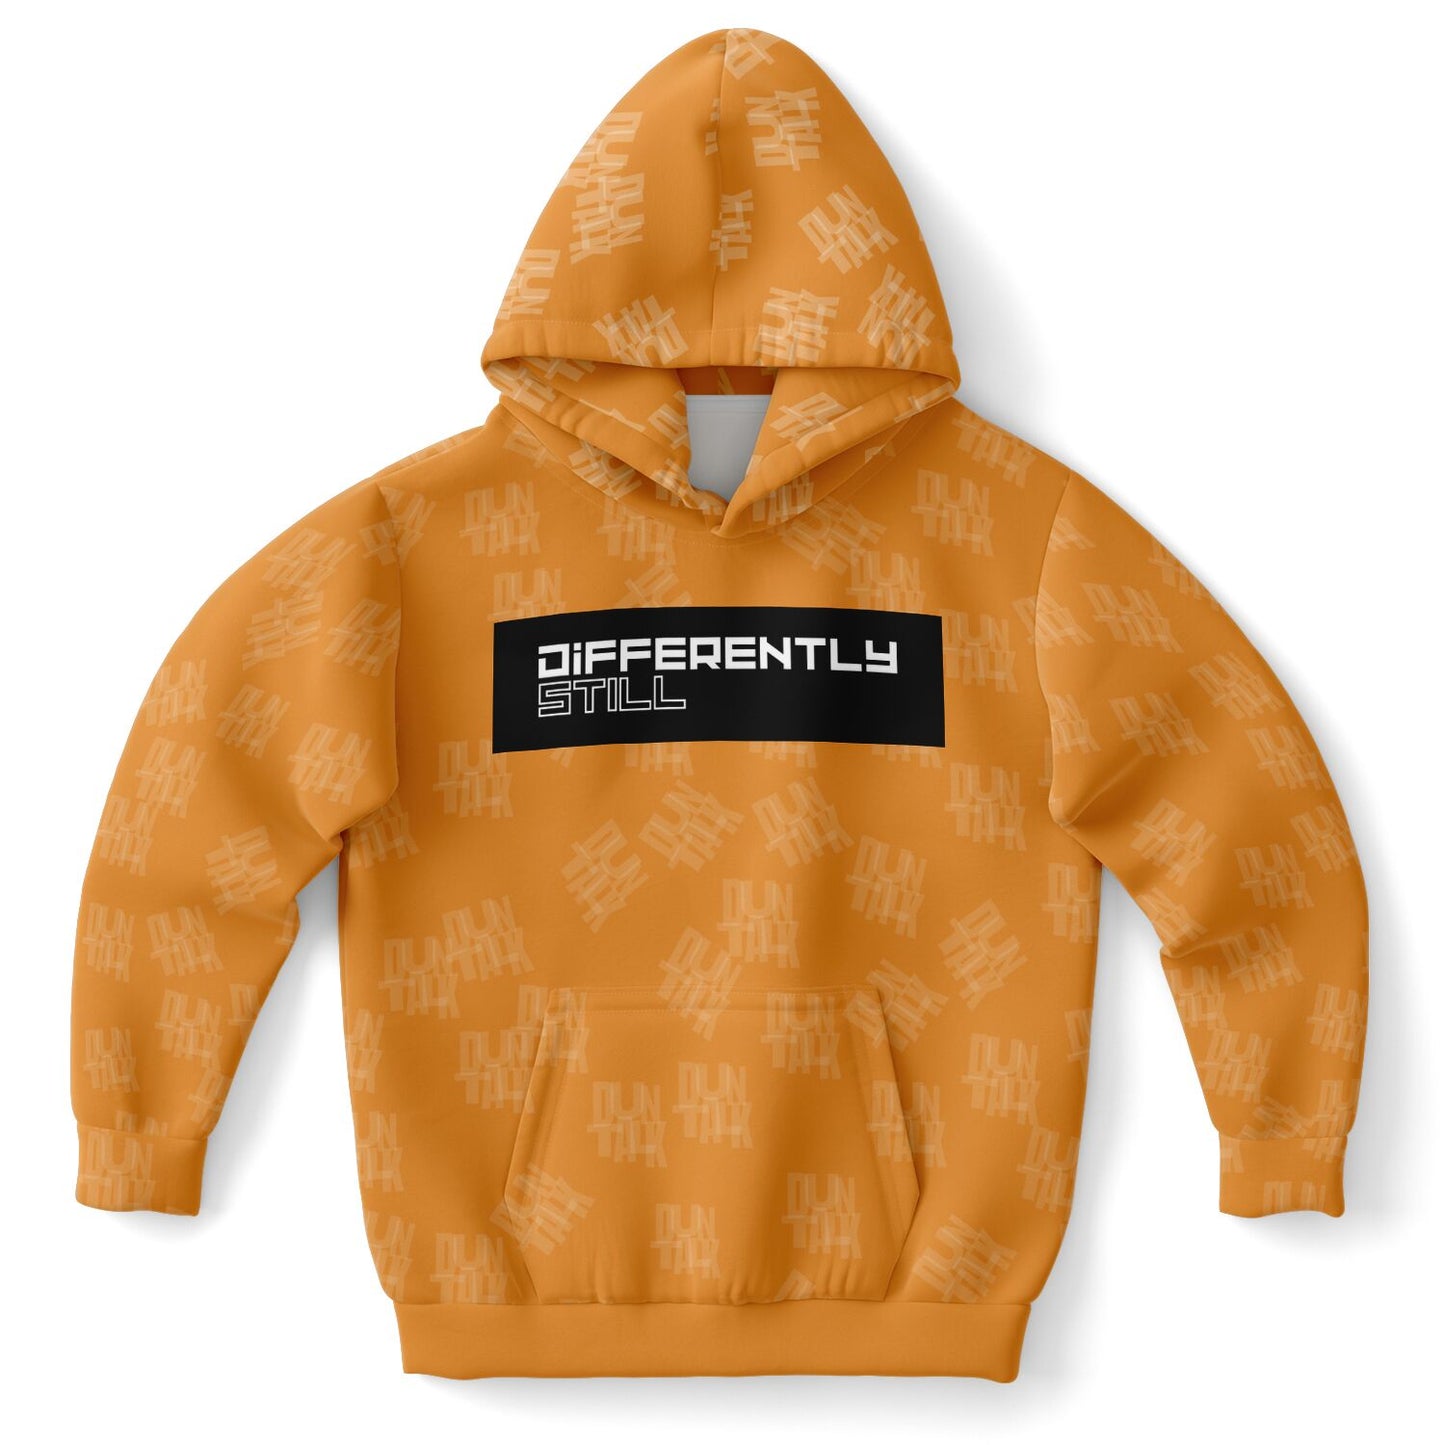 Duntalk "Differently" Youth Hoodie